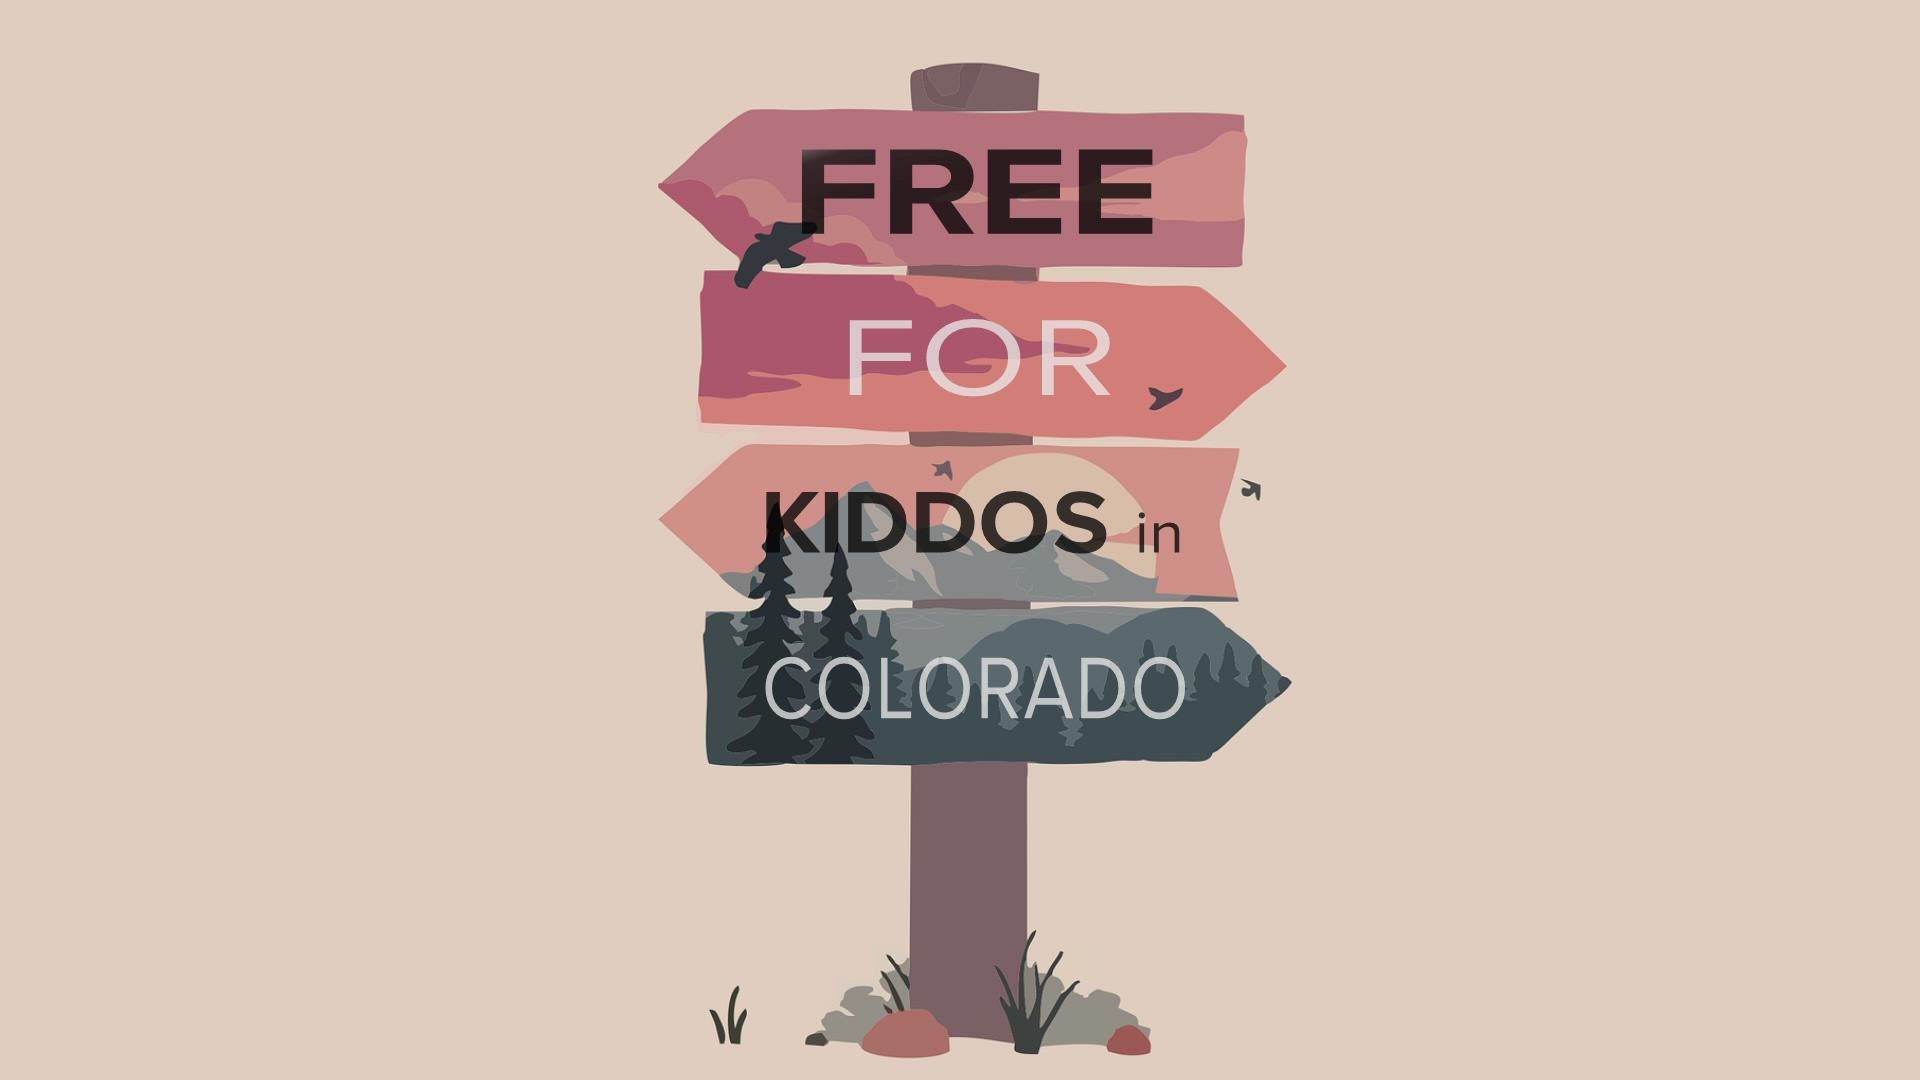 Here are some fun, free, family-friendly events in Colorado from Sept. 3-5, 2022.